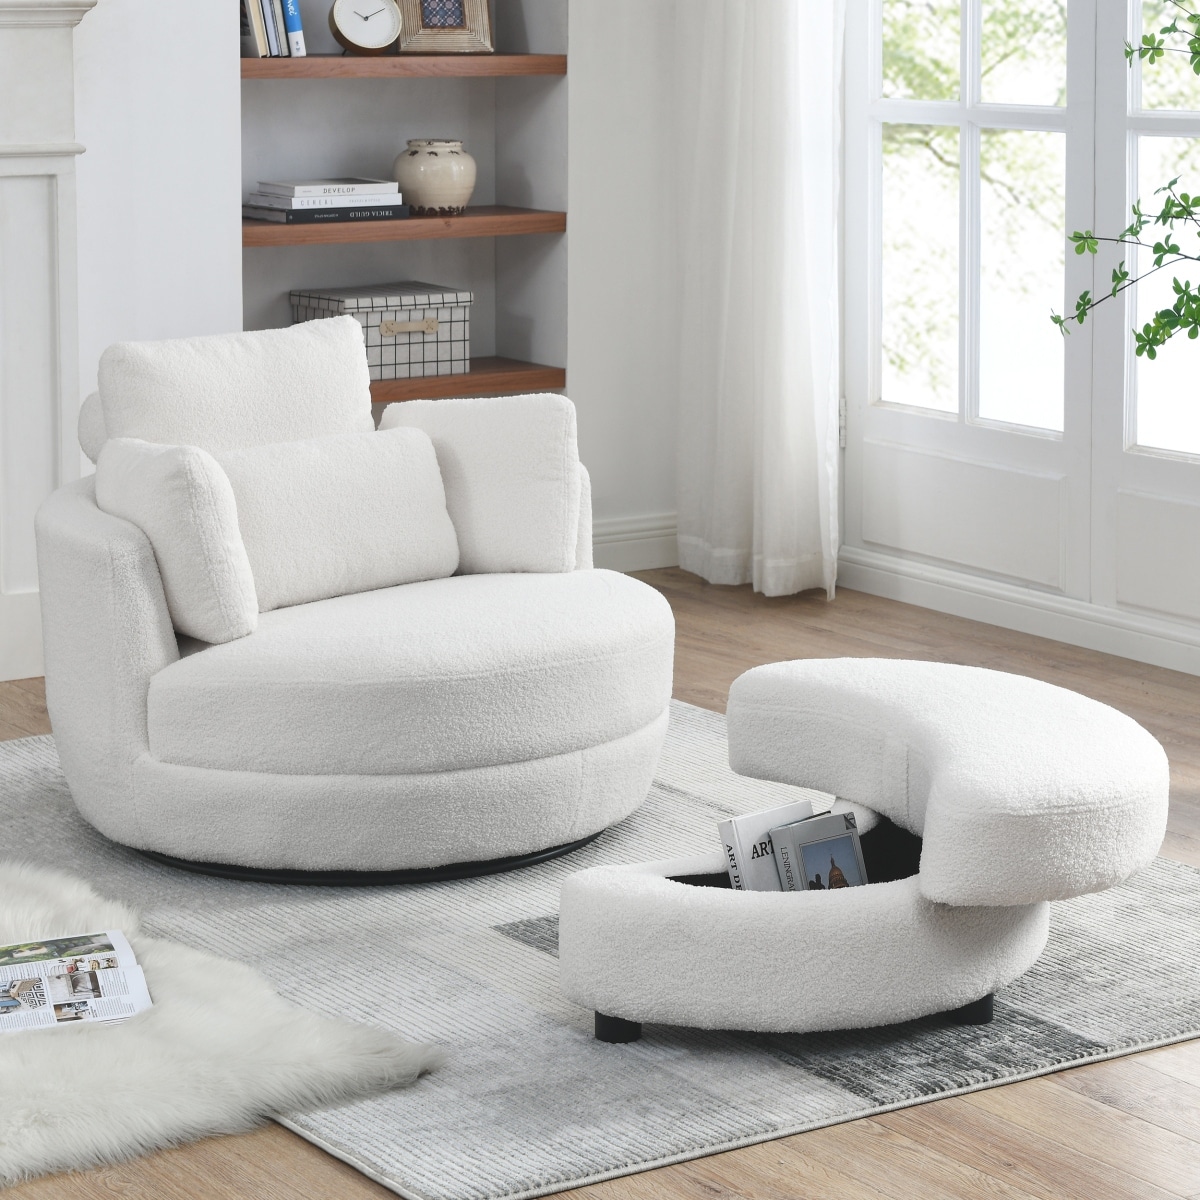 https://ak1.ostkcdn.com/images/products/is/images/direct/d61eceda40f34fb5750df4677e8d37bec50a86dc/Modern-Swivel-Accent-Sofa-Barrel-Chair-with-Half-Moon-Storage-Ottoman%2CLinen-Leisure-Chair-Round-Accent-Lounge-Chair-with-Pillows.jpg